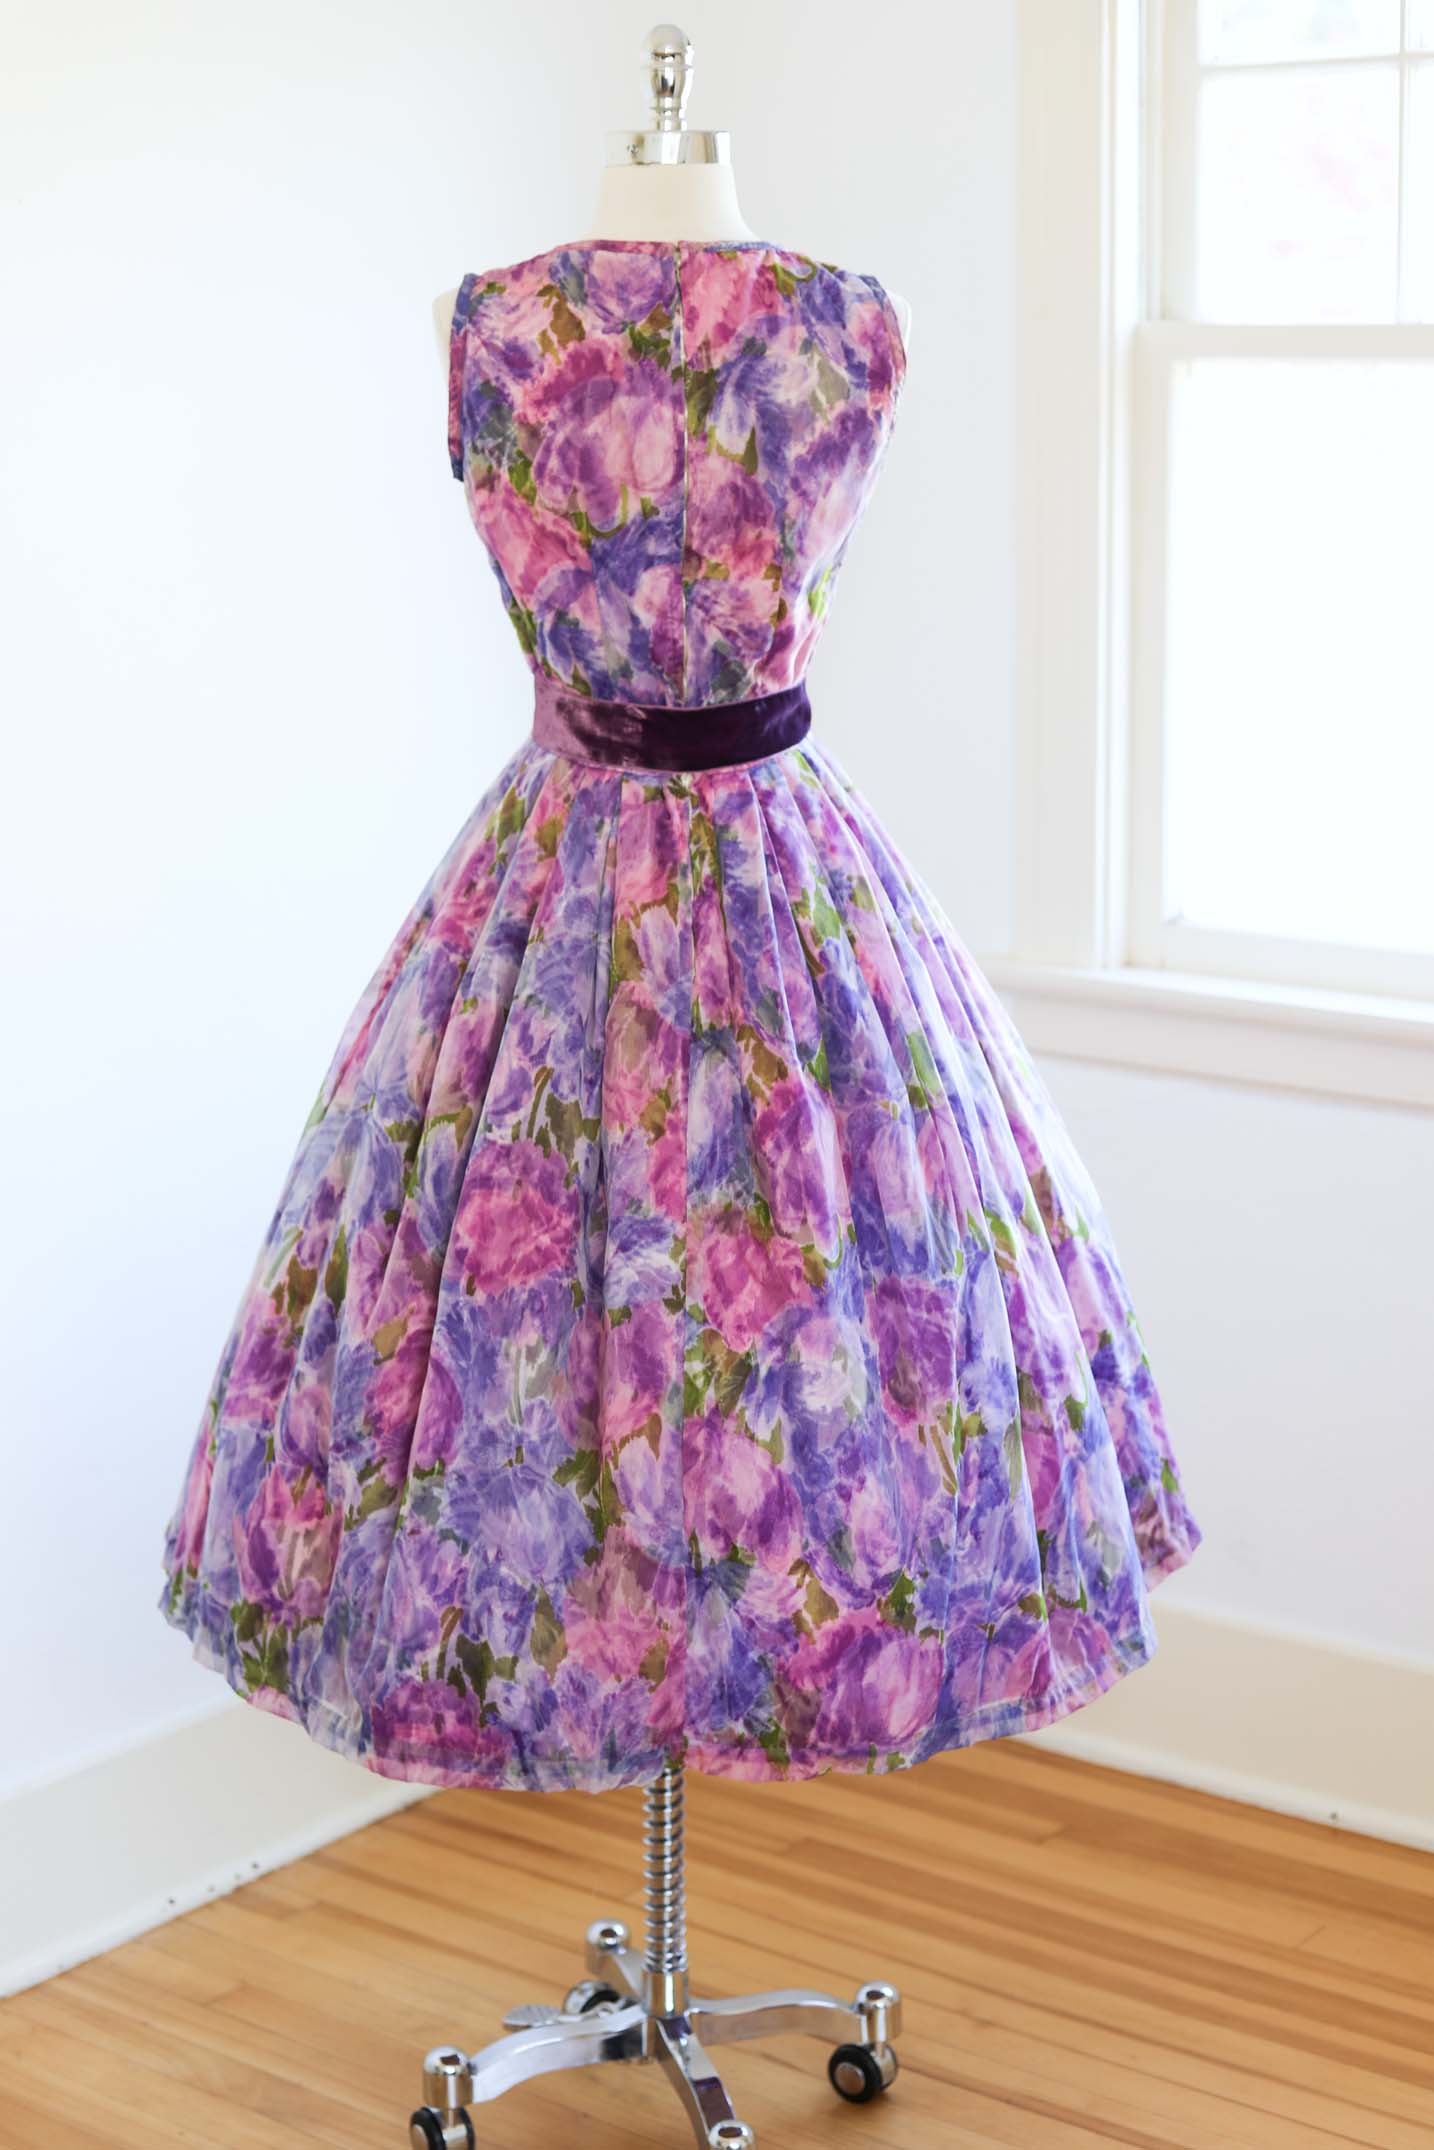 Vintage 1950s Party Dress - SUPER BEAUTIFUL Saturated Violet, Rose, Pink, Blue Chiffon Tulips Floral Tea-Length Dress Size XS to S